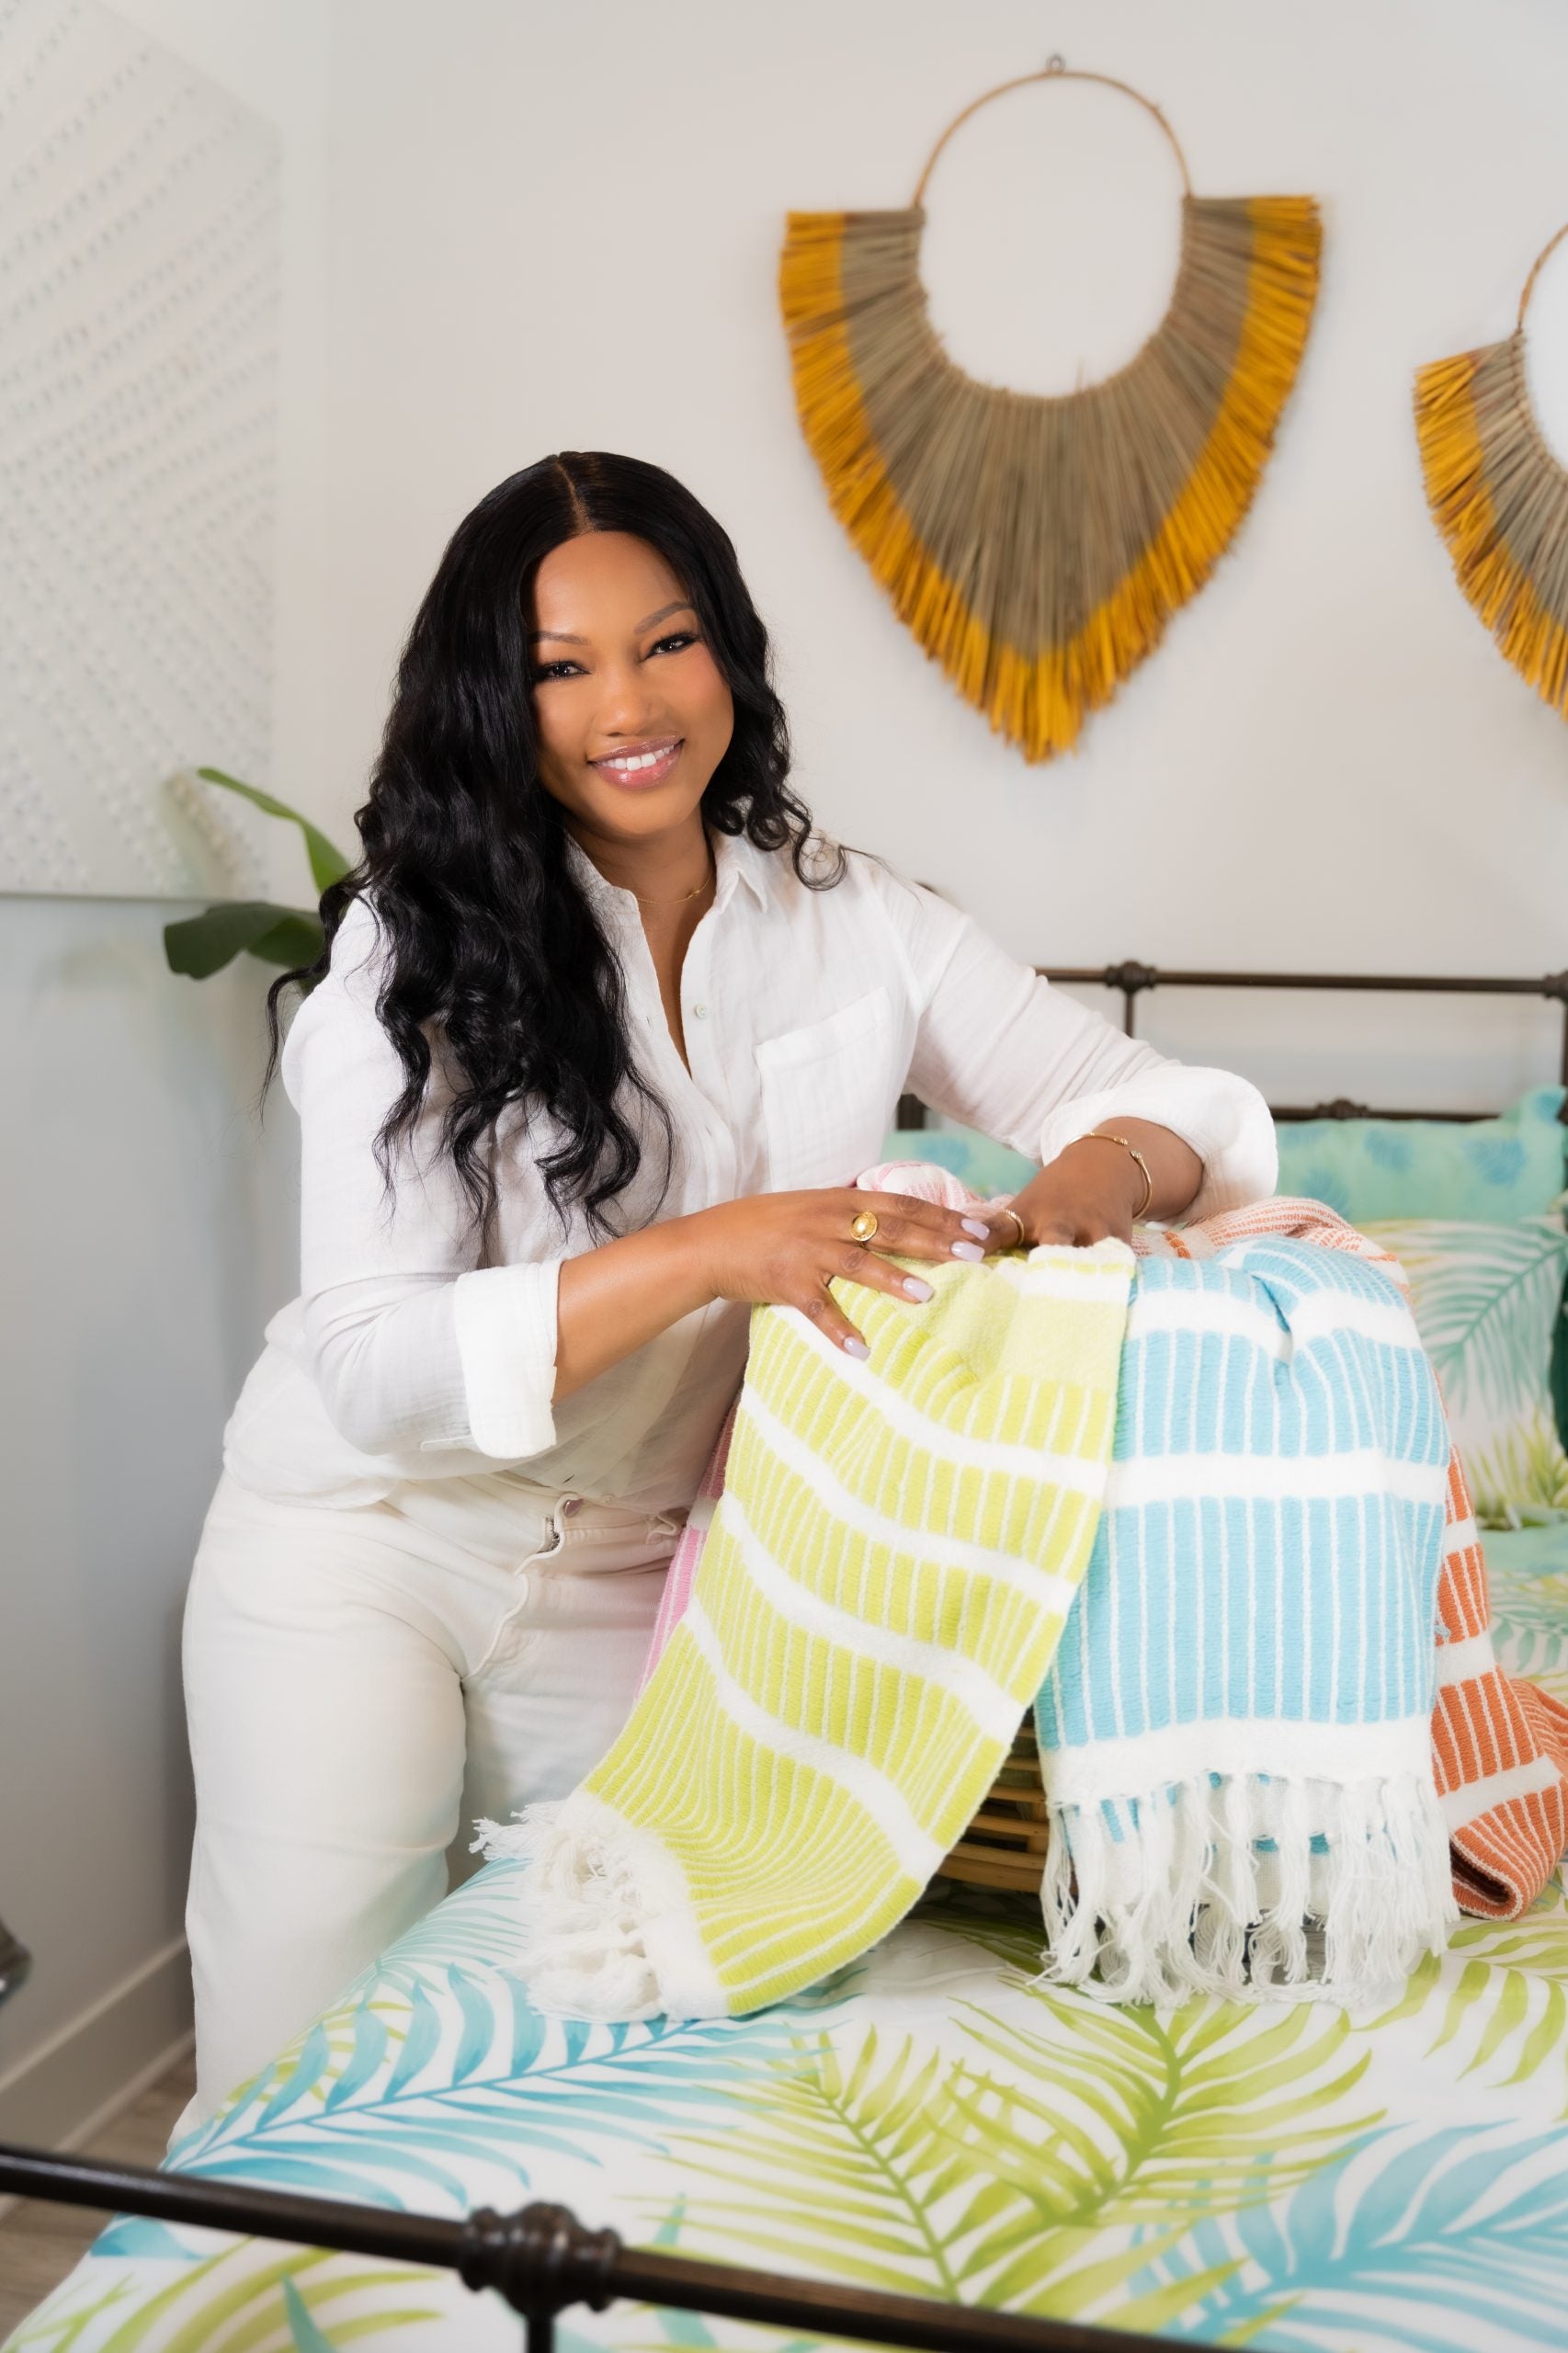 Garcelle Beauvais Just Released A Home Collection With HSN Highlighting Her Haitian Roots